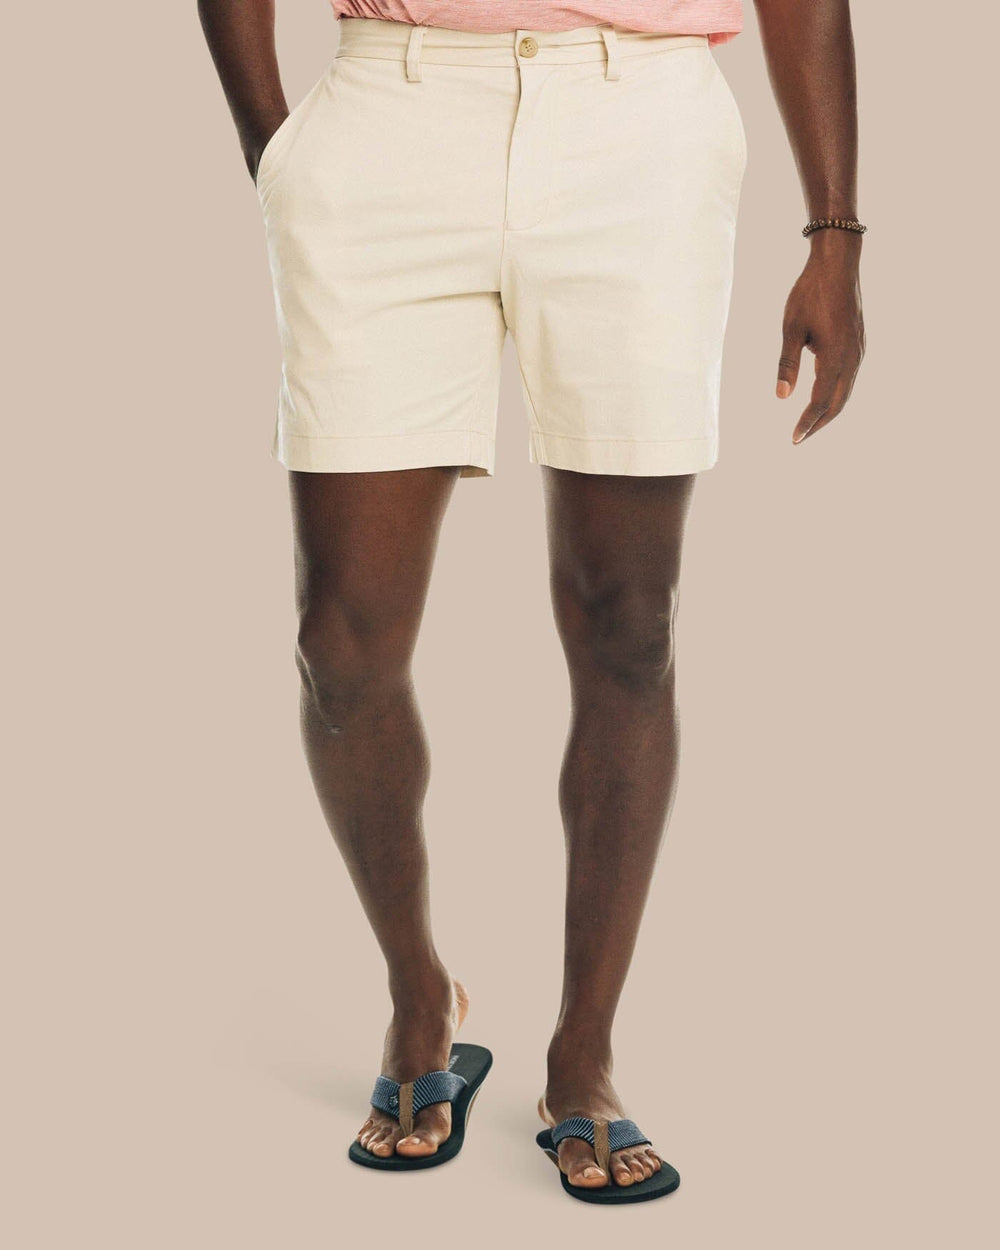 The front view of the Men's New Channel Marker 9 Inch Short by Southern Tide - Light Khaki